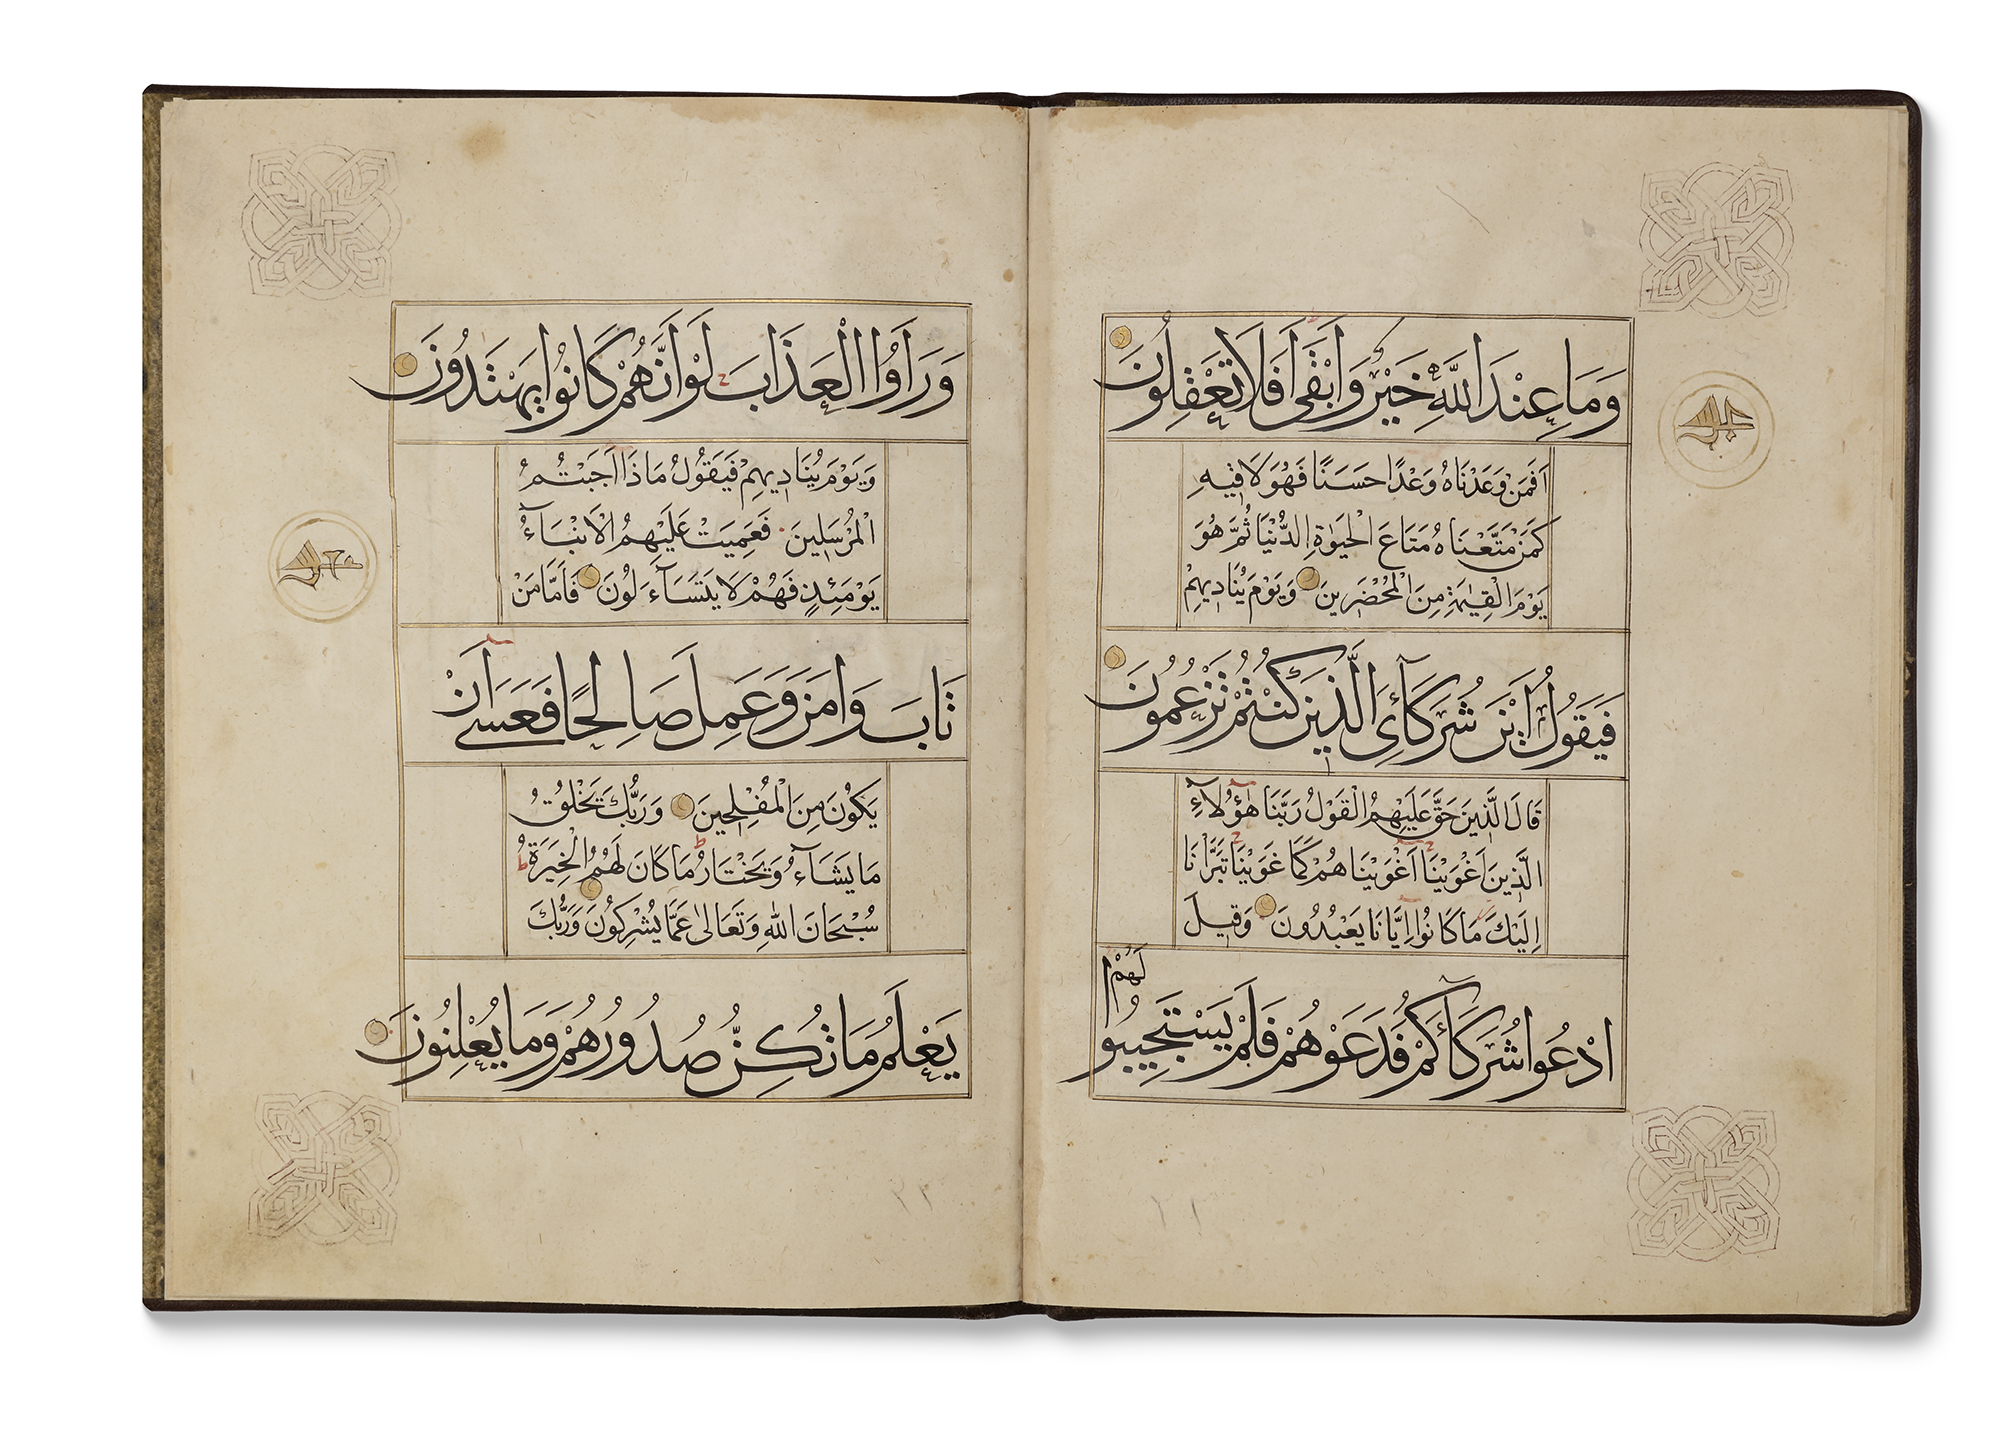 A LATE TIMURID QURAN JUZ, BY AHMED AL-RUMI IN 858 AH/1454 AD - Image 12 of 12